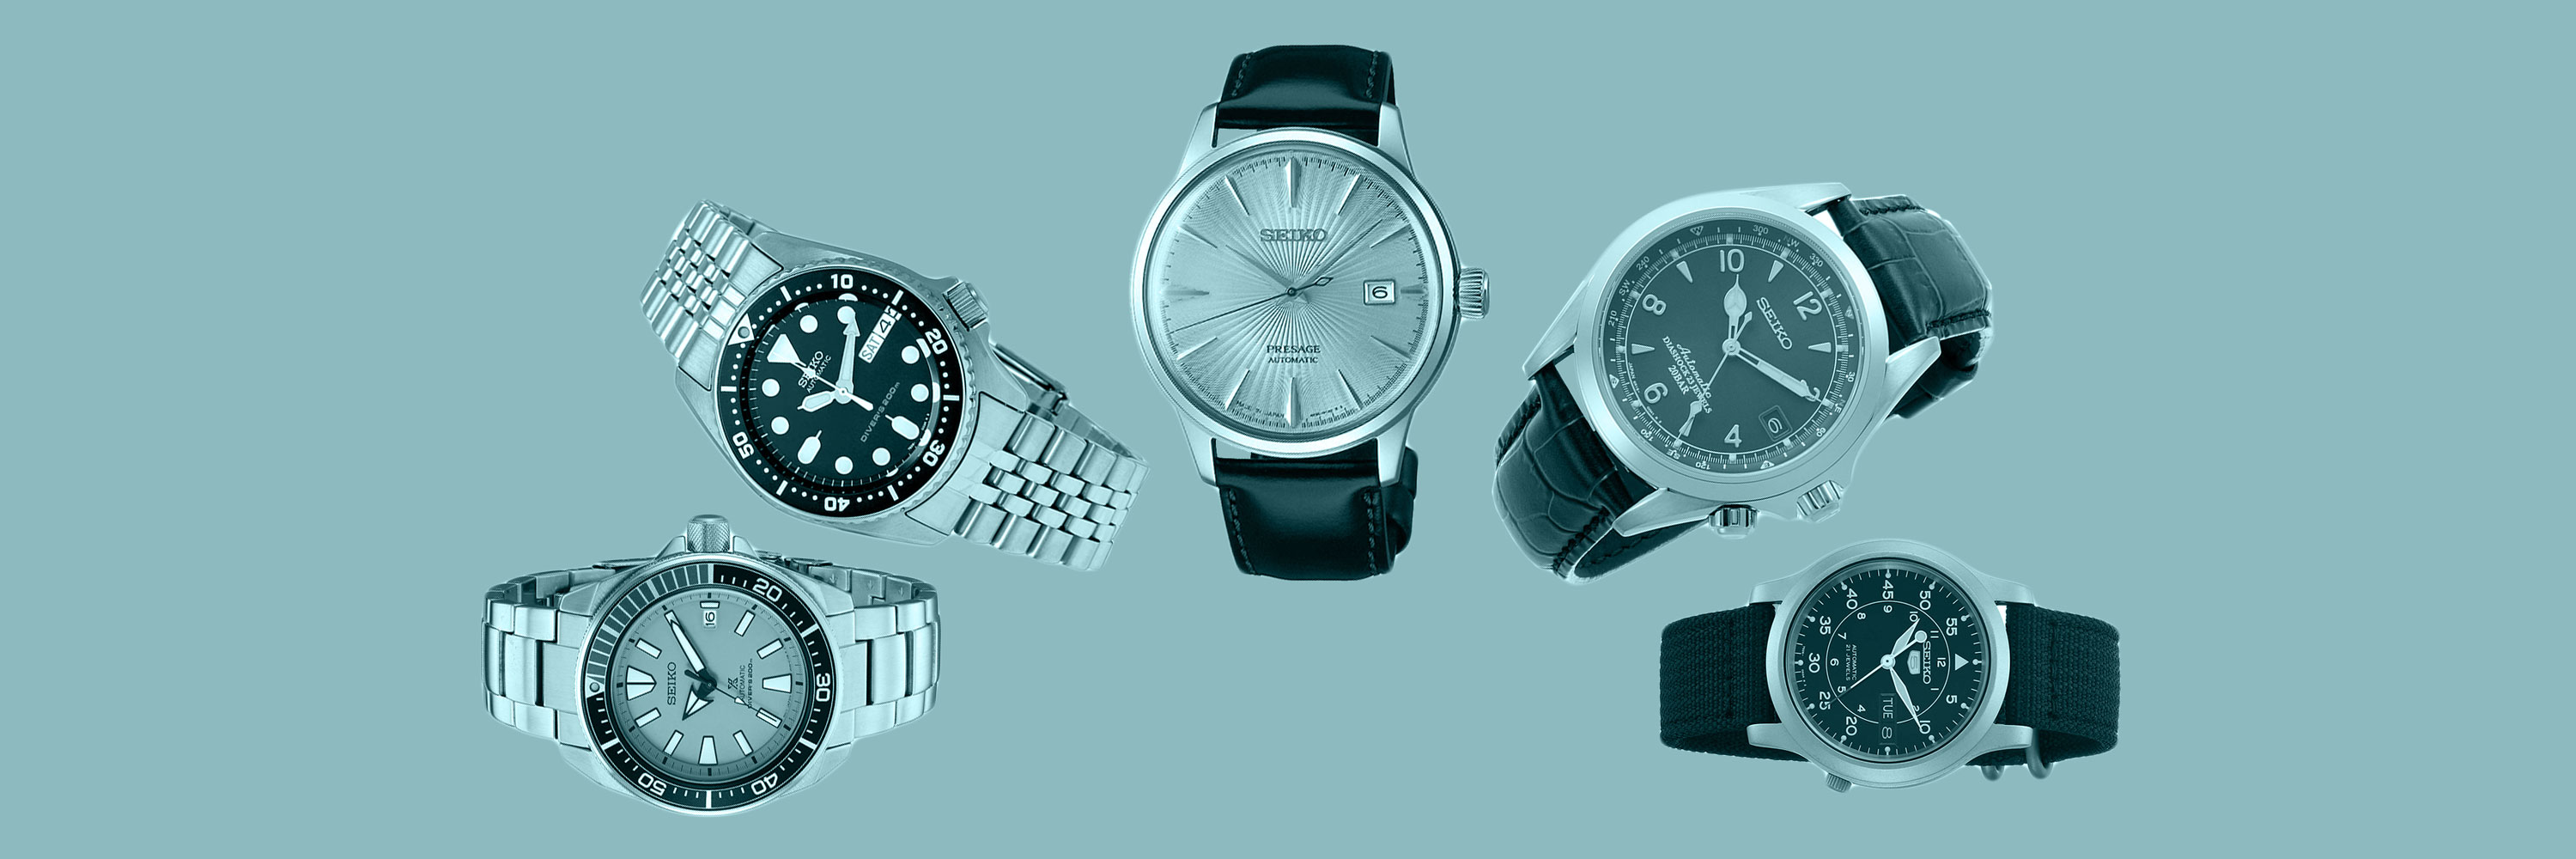 THESE Are The 15 BEST Seiko Watches In 2021 & Beyond